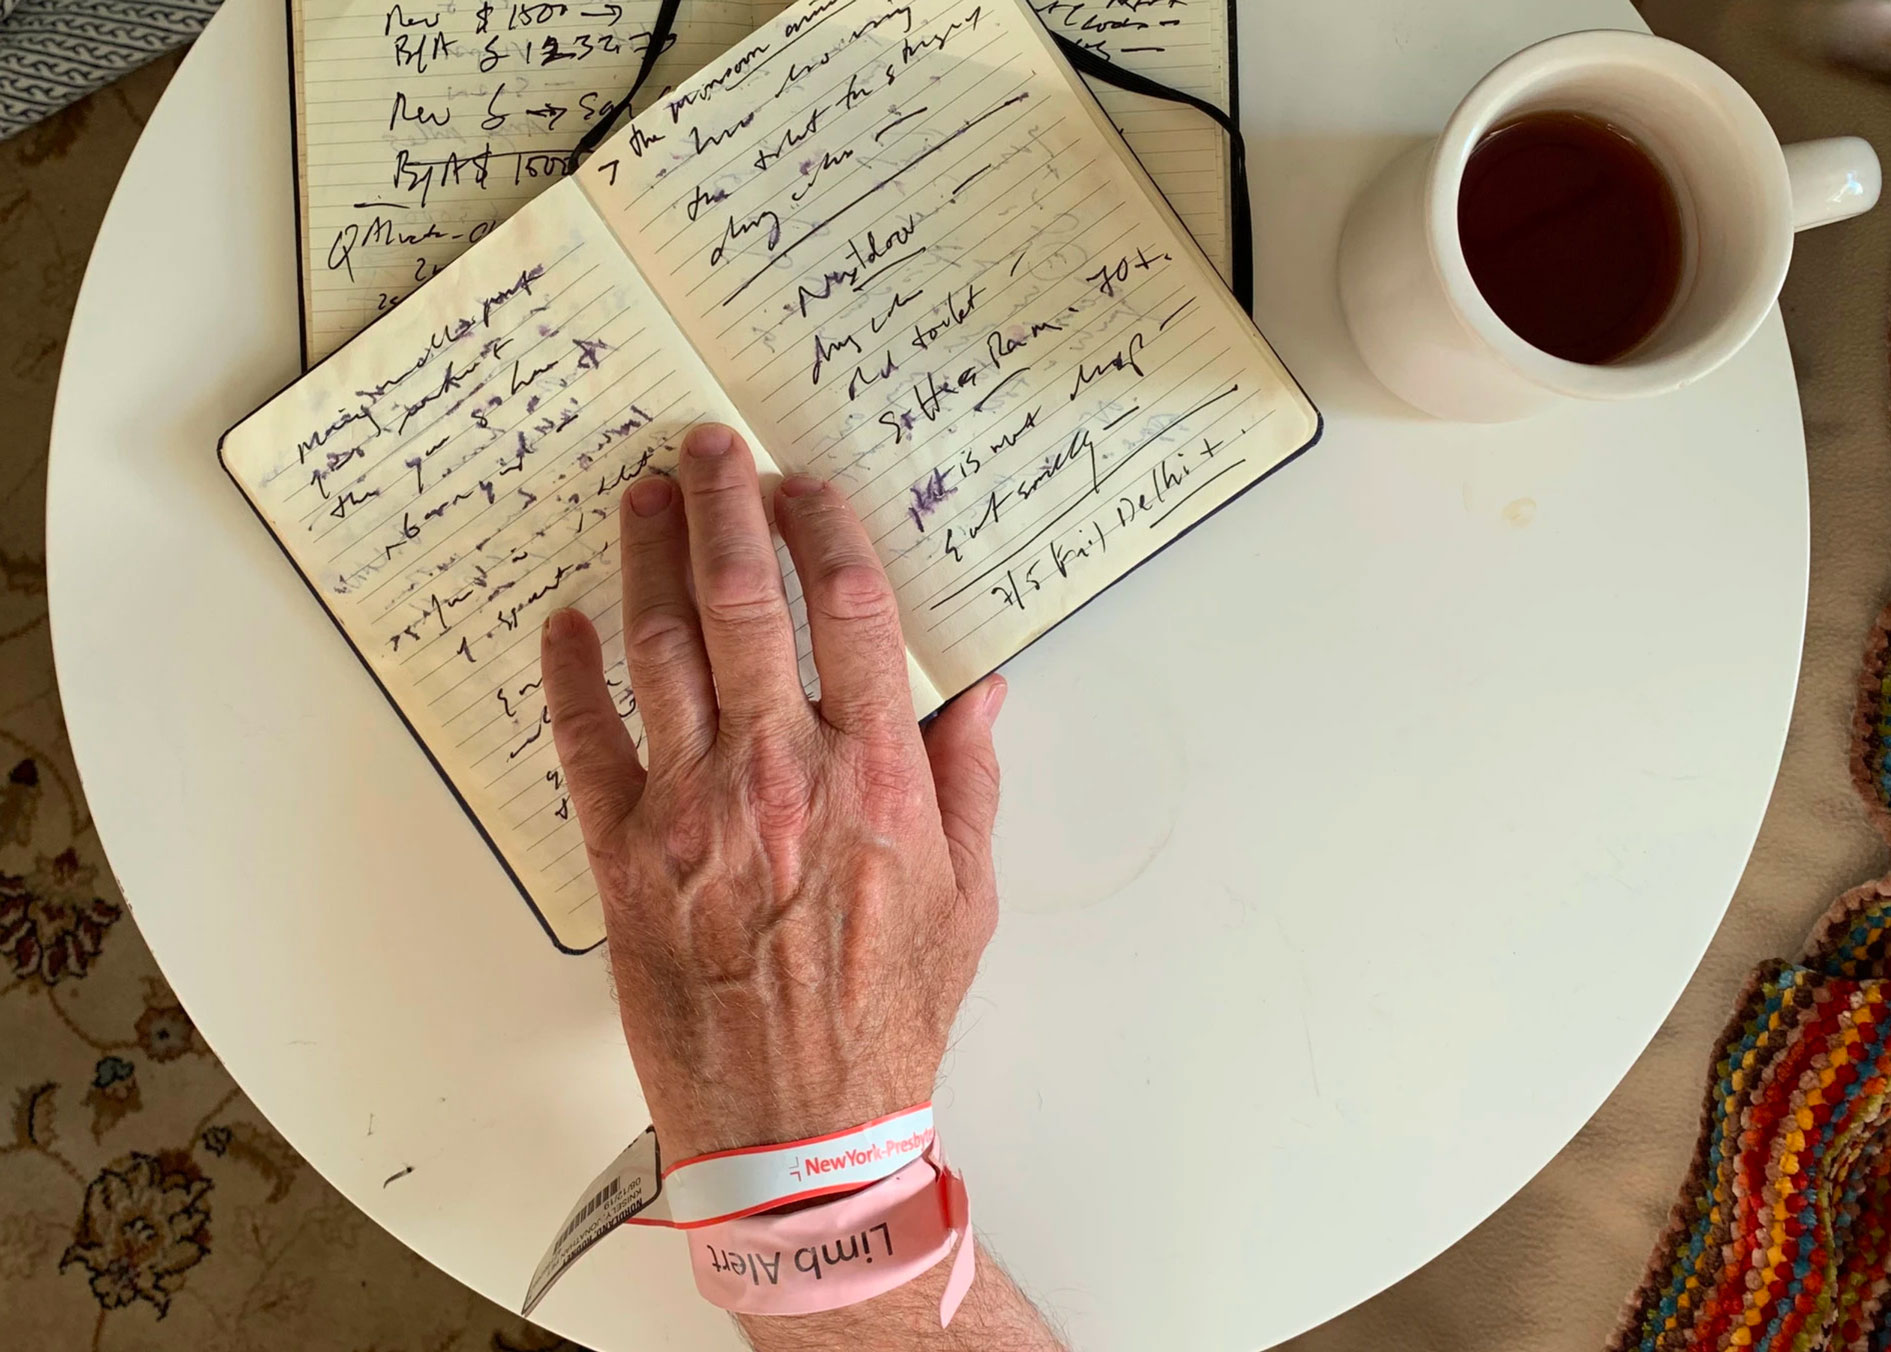 Nordland's hand on one of his journals and hospital bracelet around his wrist, courtesy